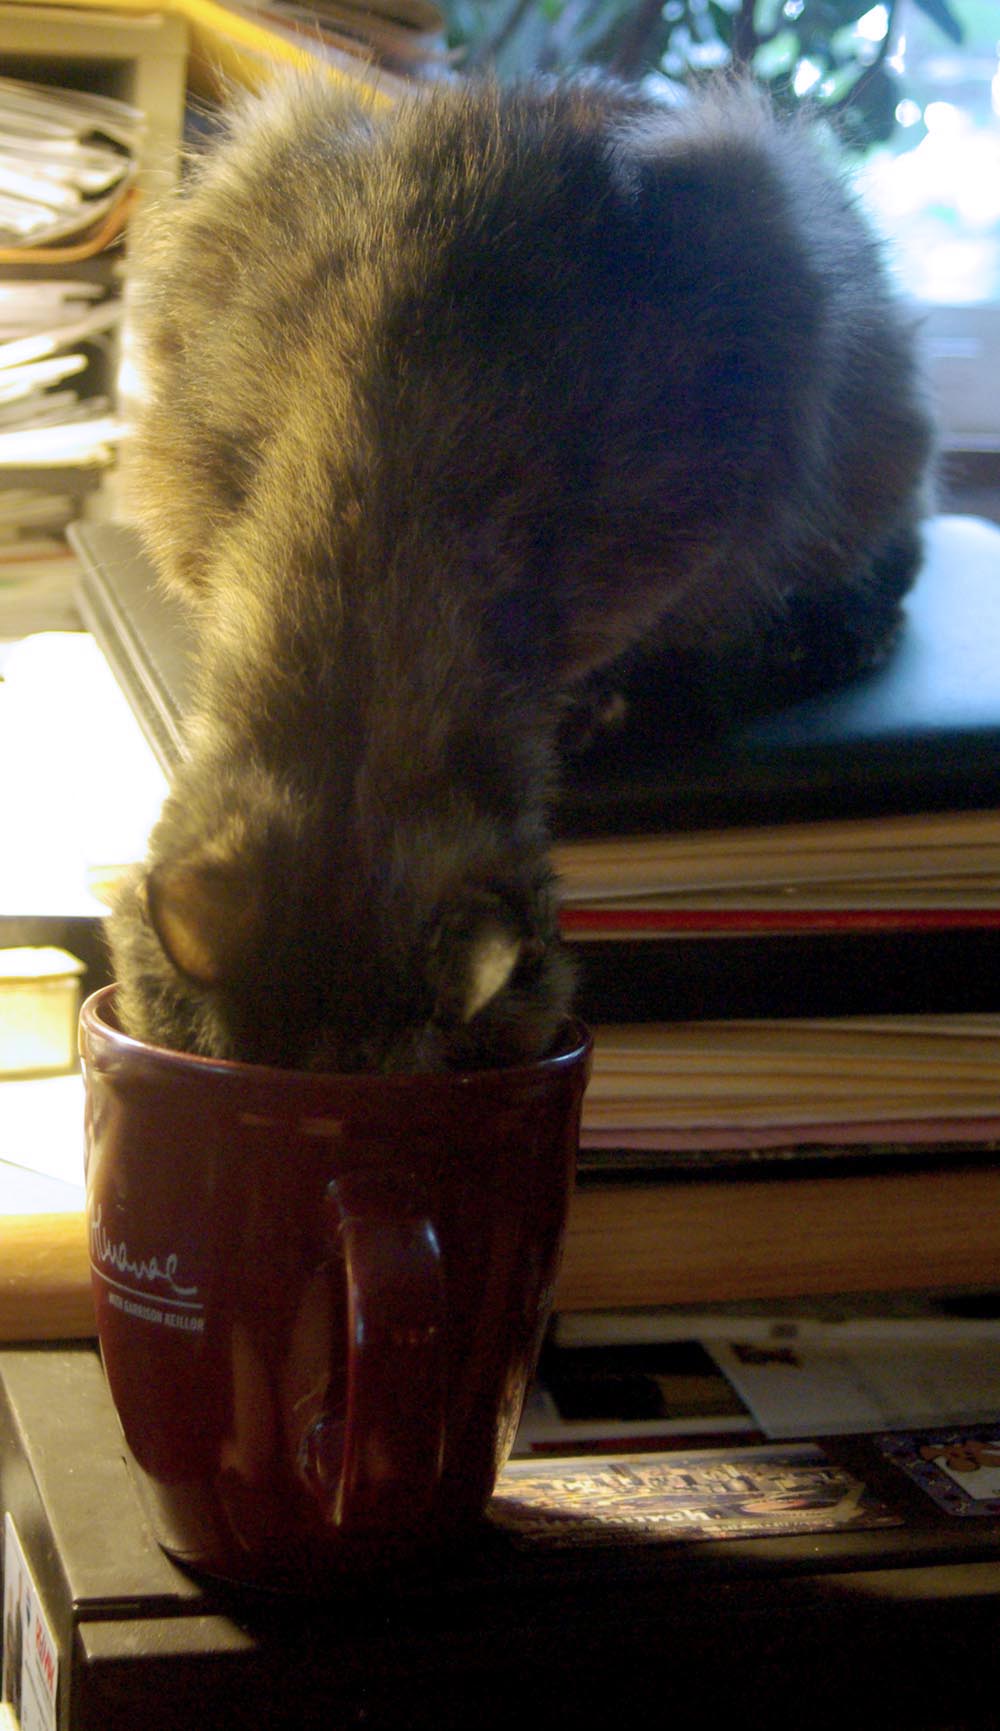 cat drinking out of mug